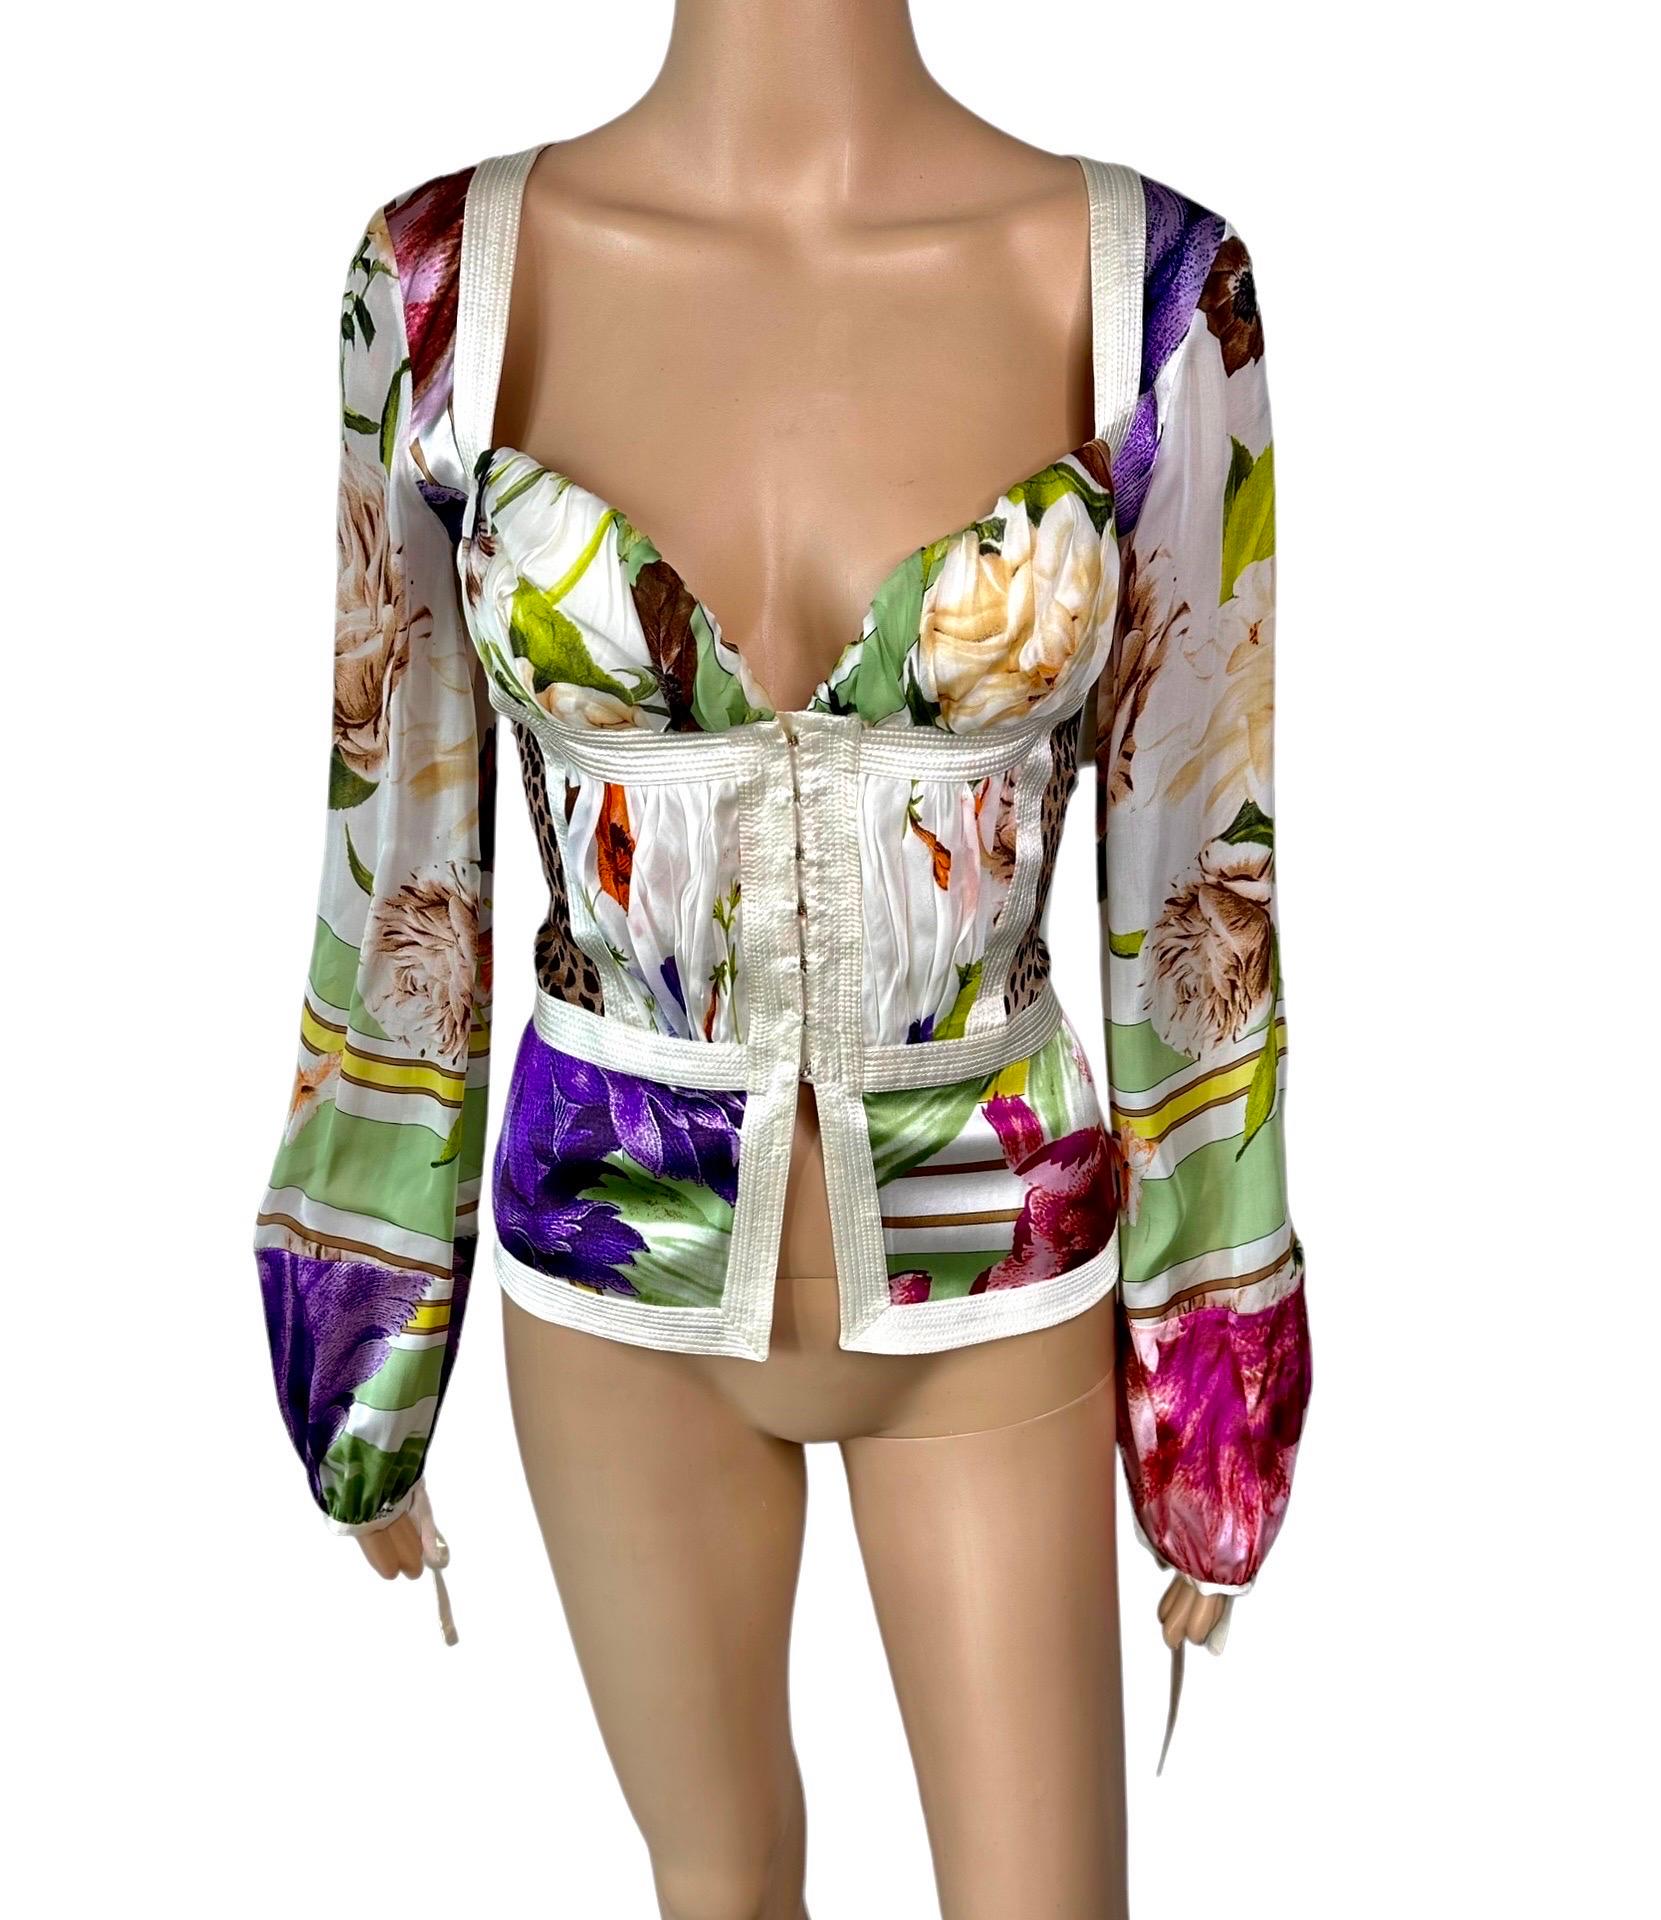 Roberto Cavalli S/S 2005 Bustier Corset Plunging Silk Blouse Top In Good Condition For Sale In Naples, FL